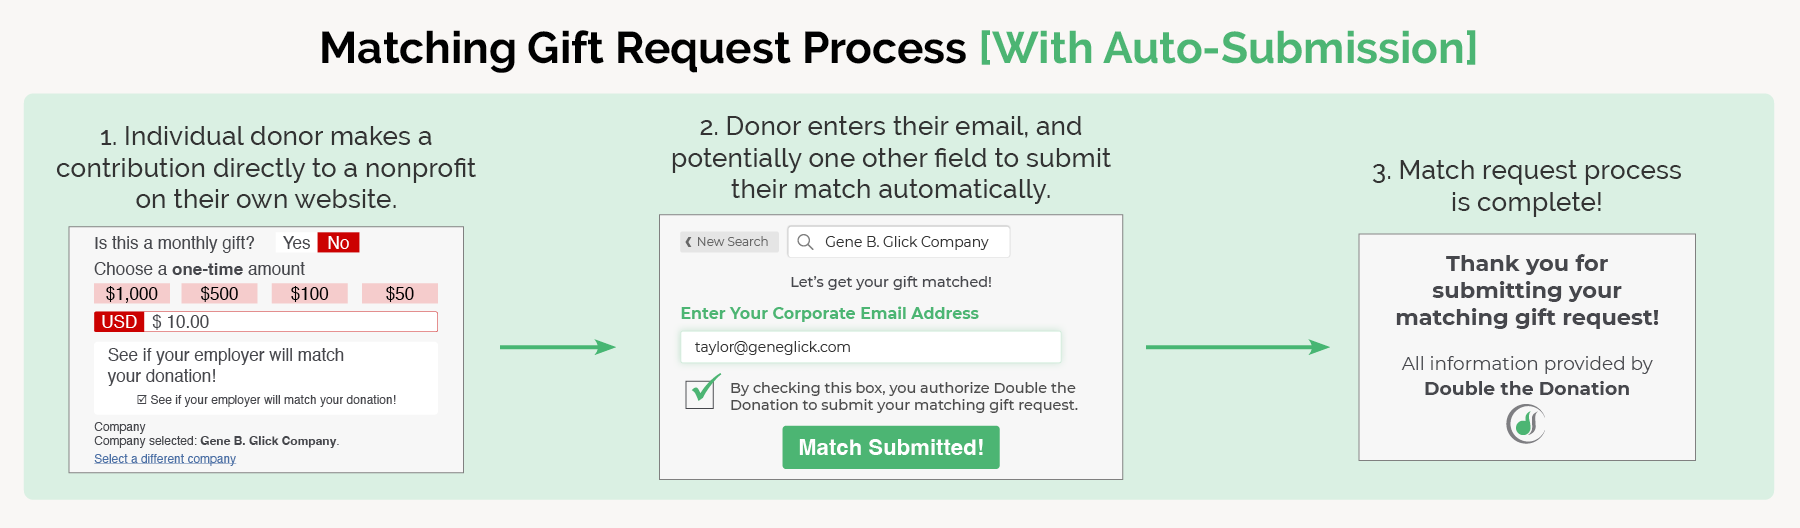 Graphic explaining the auto-submission process for matching gift requests